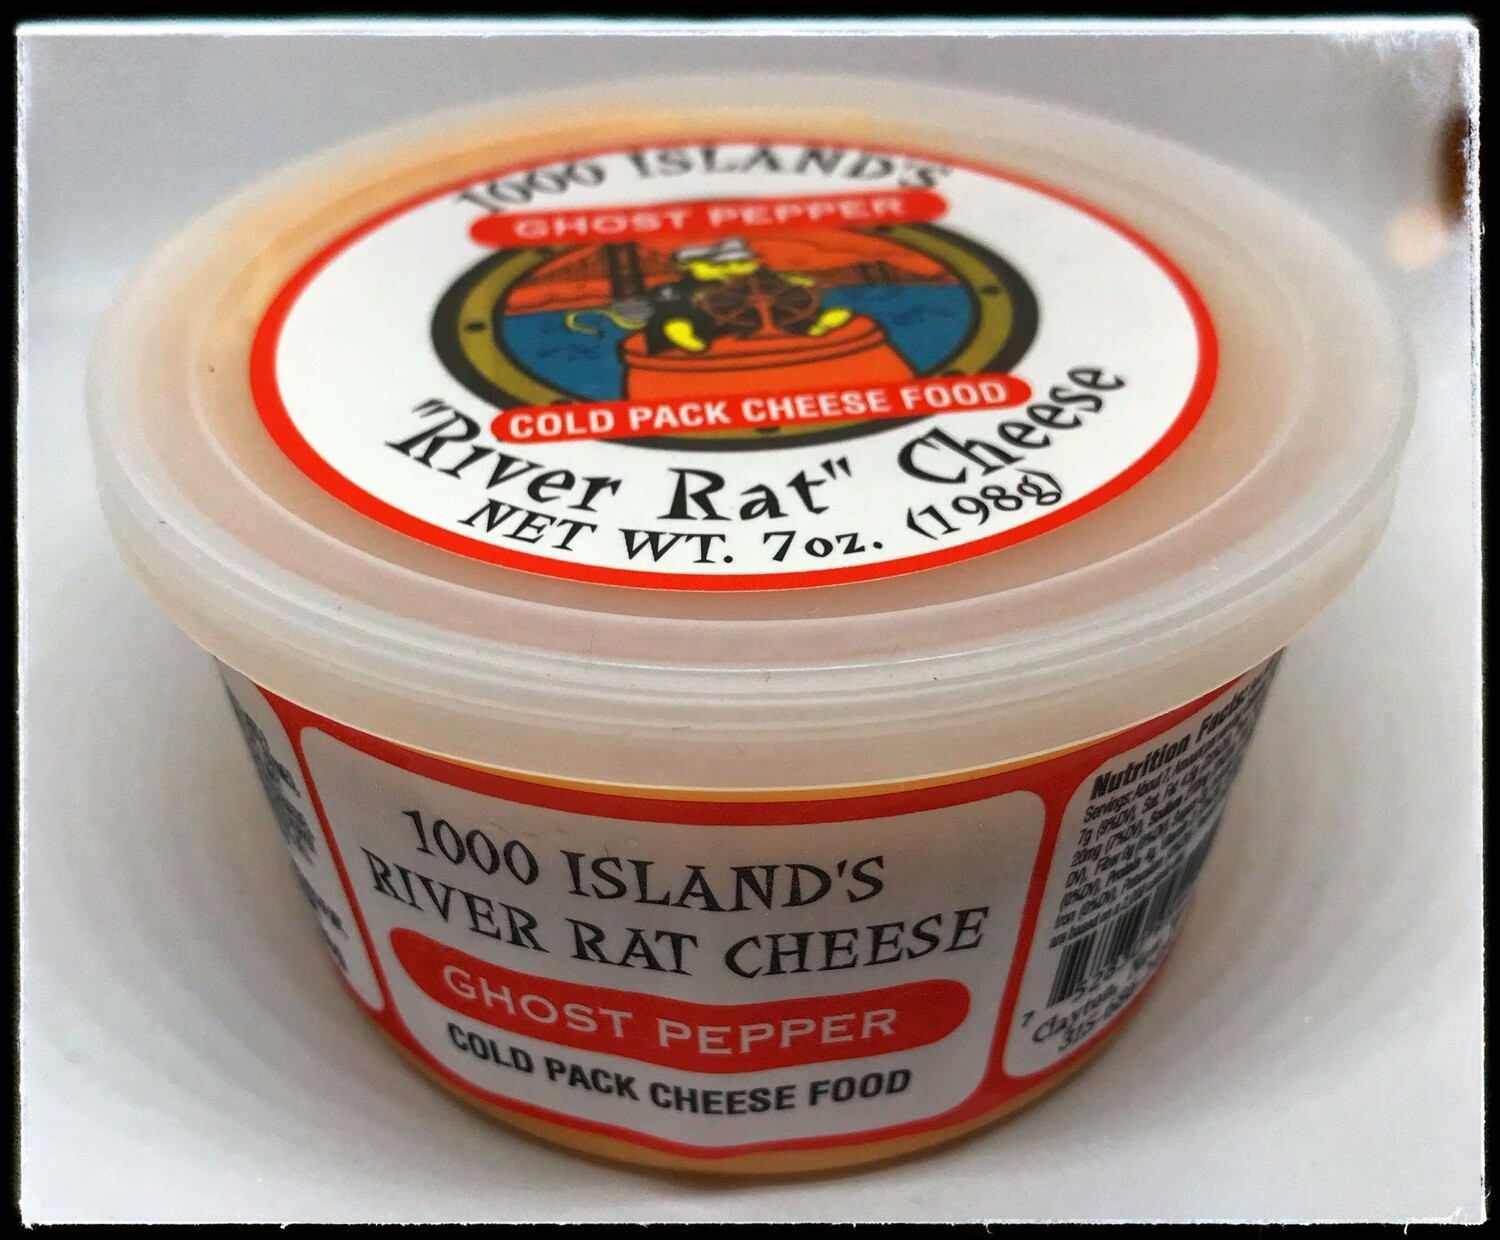 River Rat Ghost Pepper Cheese Spread